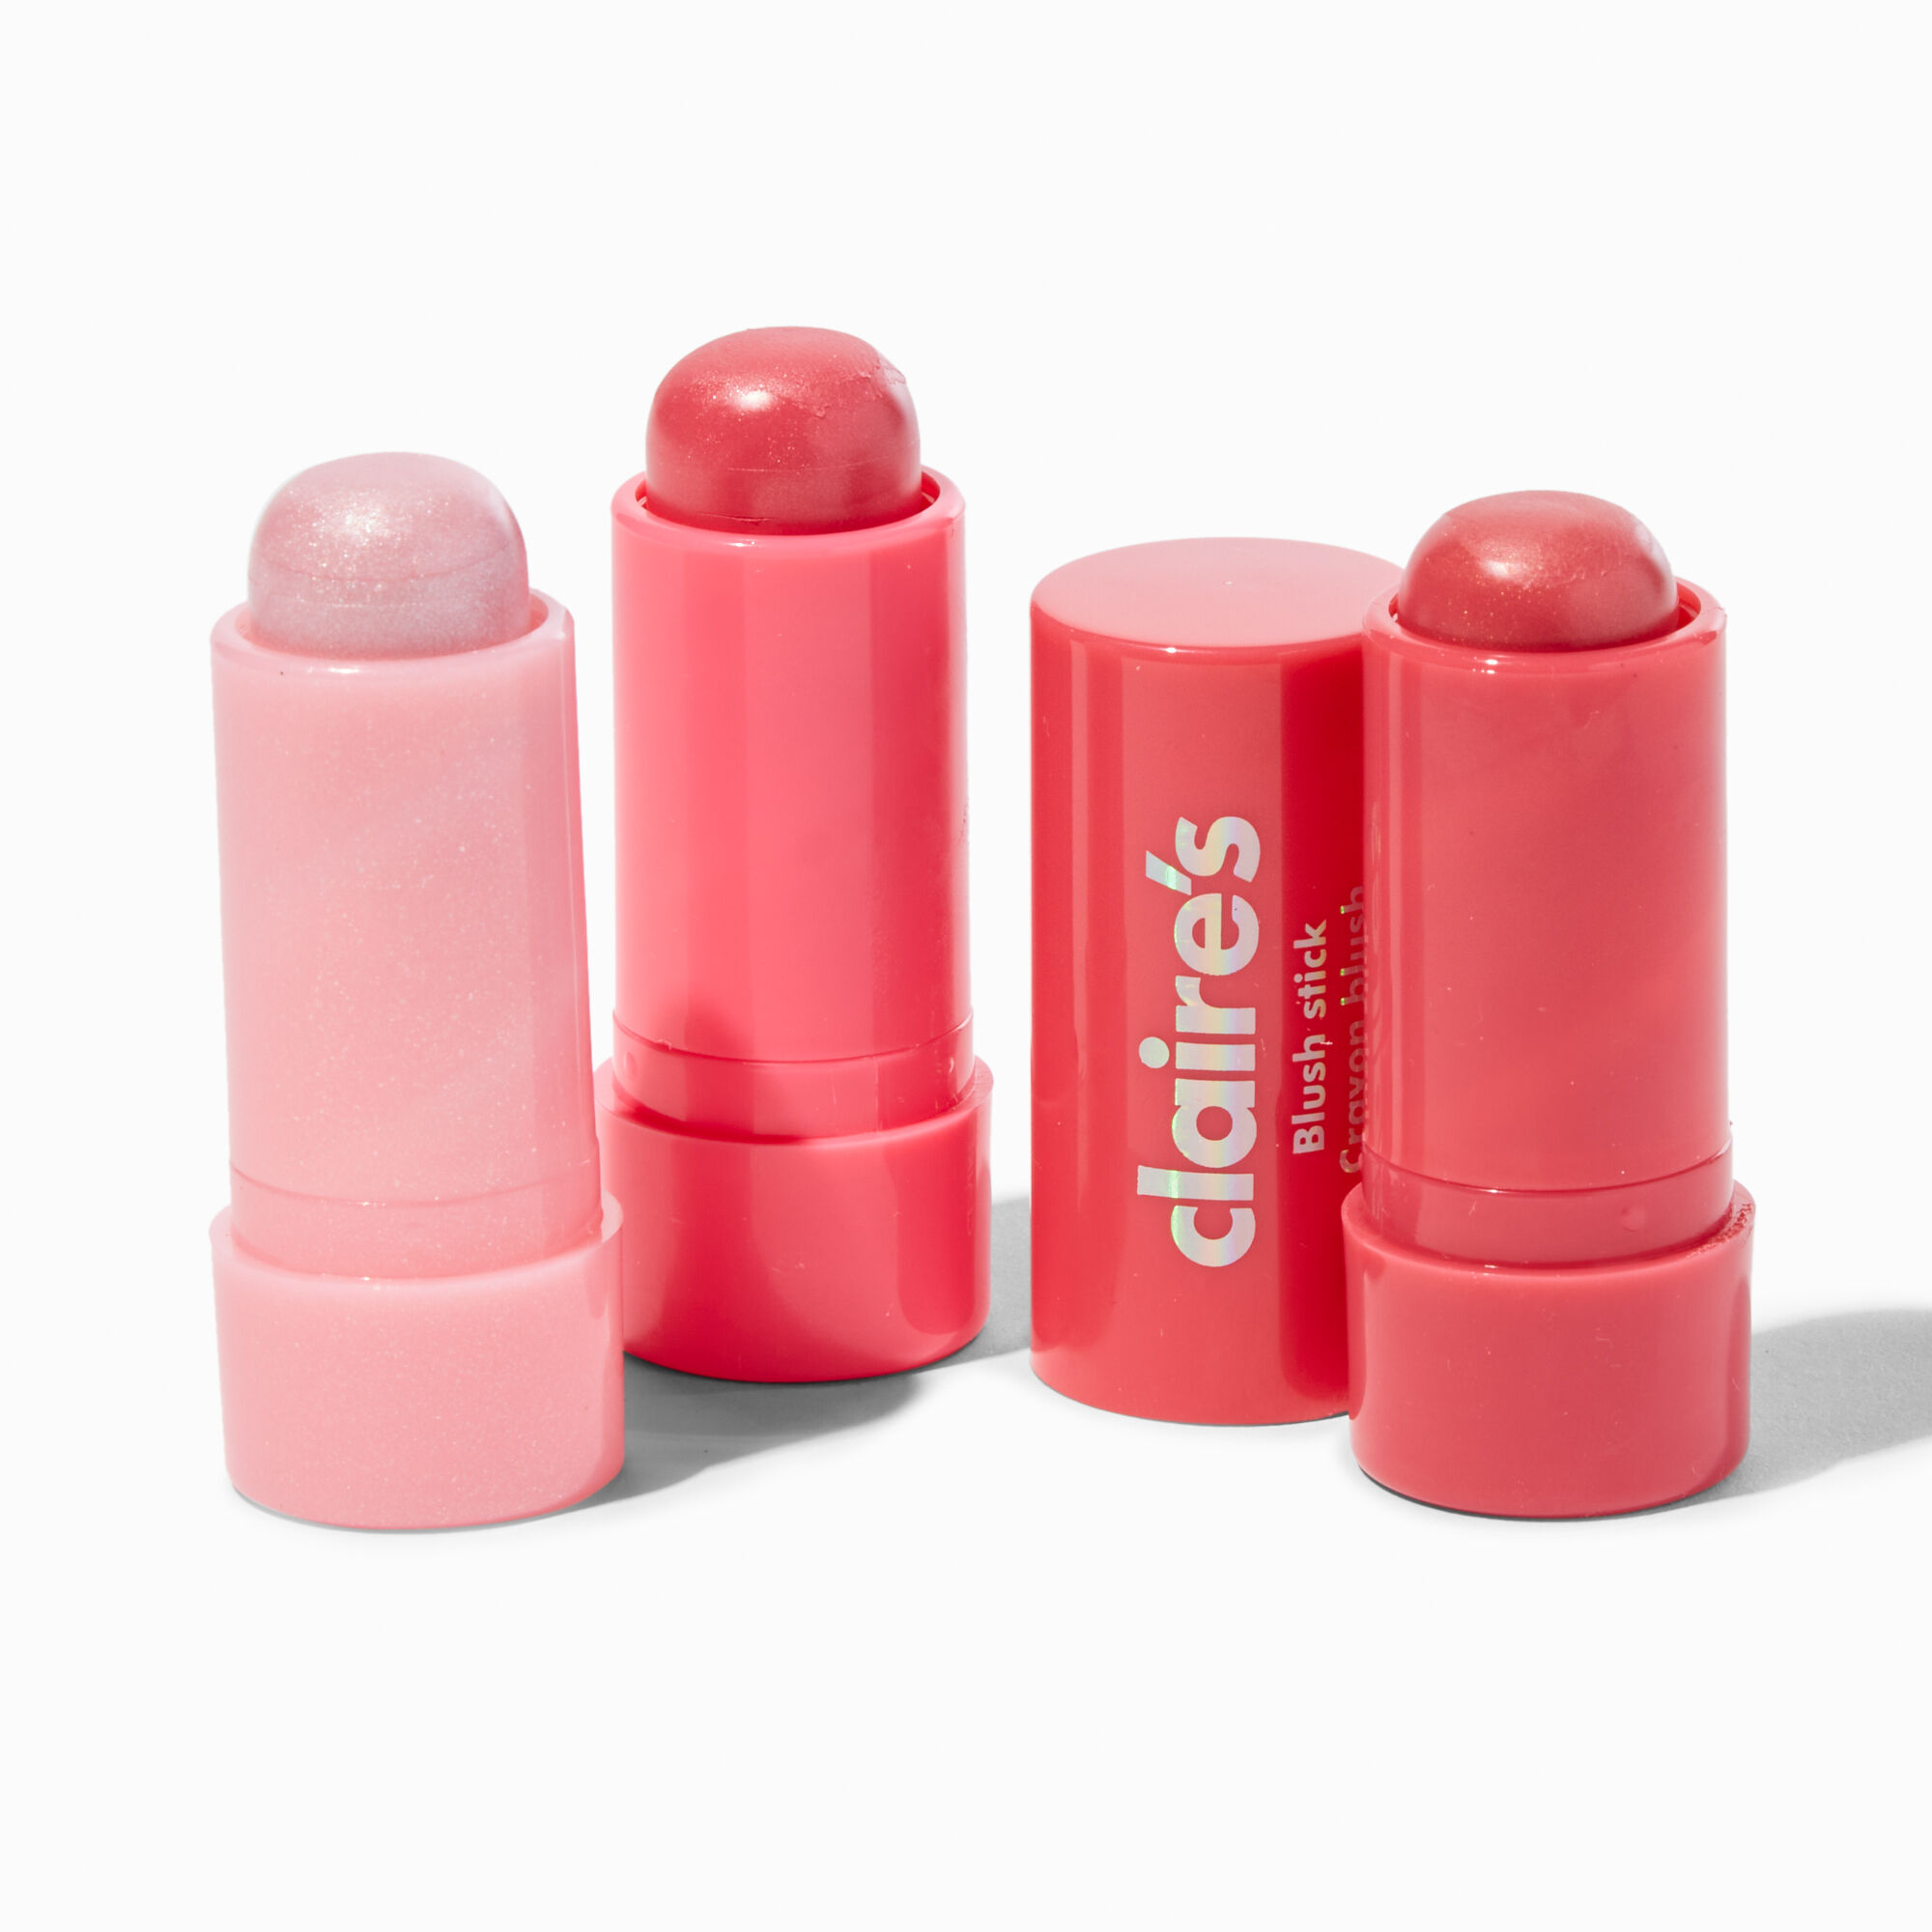 View Claires Cheek Stick Set 3 Pack Pink information